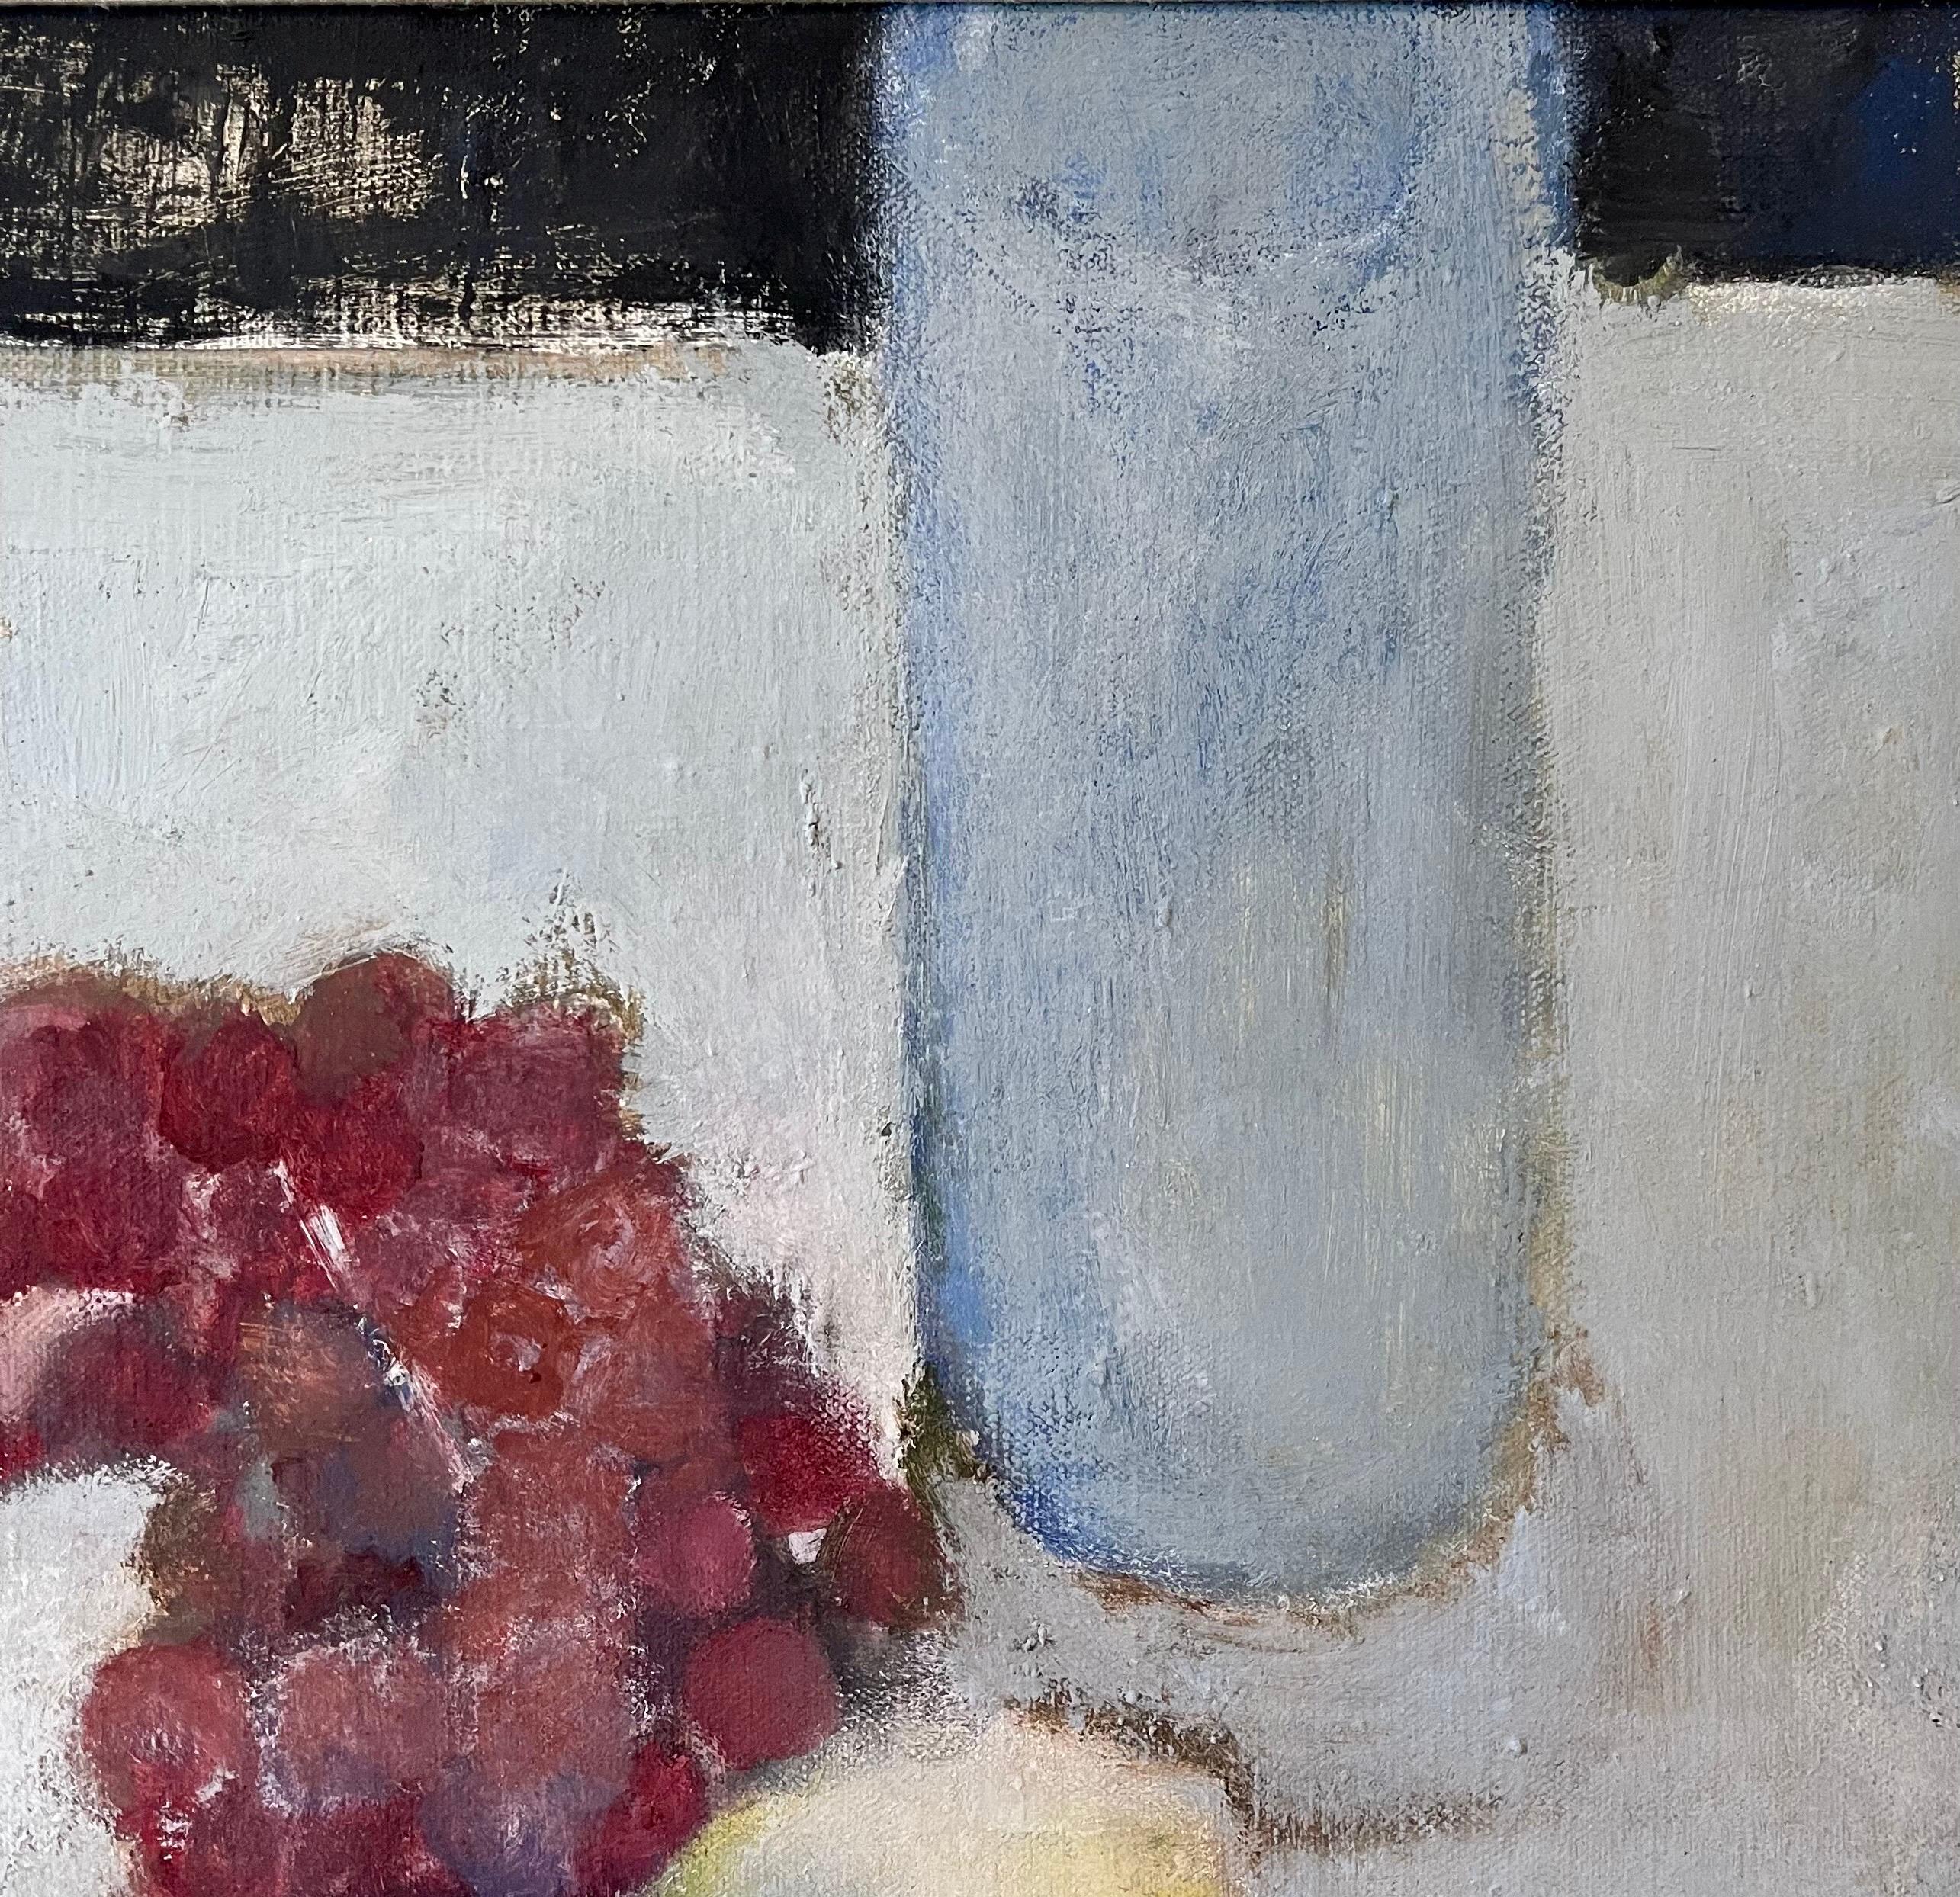 Betsy Podlach (American, born 1964.)
Still life with Fruit and Glass Bottle
Framed it measures 26.5 X 21.5  Canvas is  21.5  X 16.5

Betsy Podlach graduated from Harvard, cum laude, (she studied at Harvard with Alfred Decreido and William Reimann as